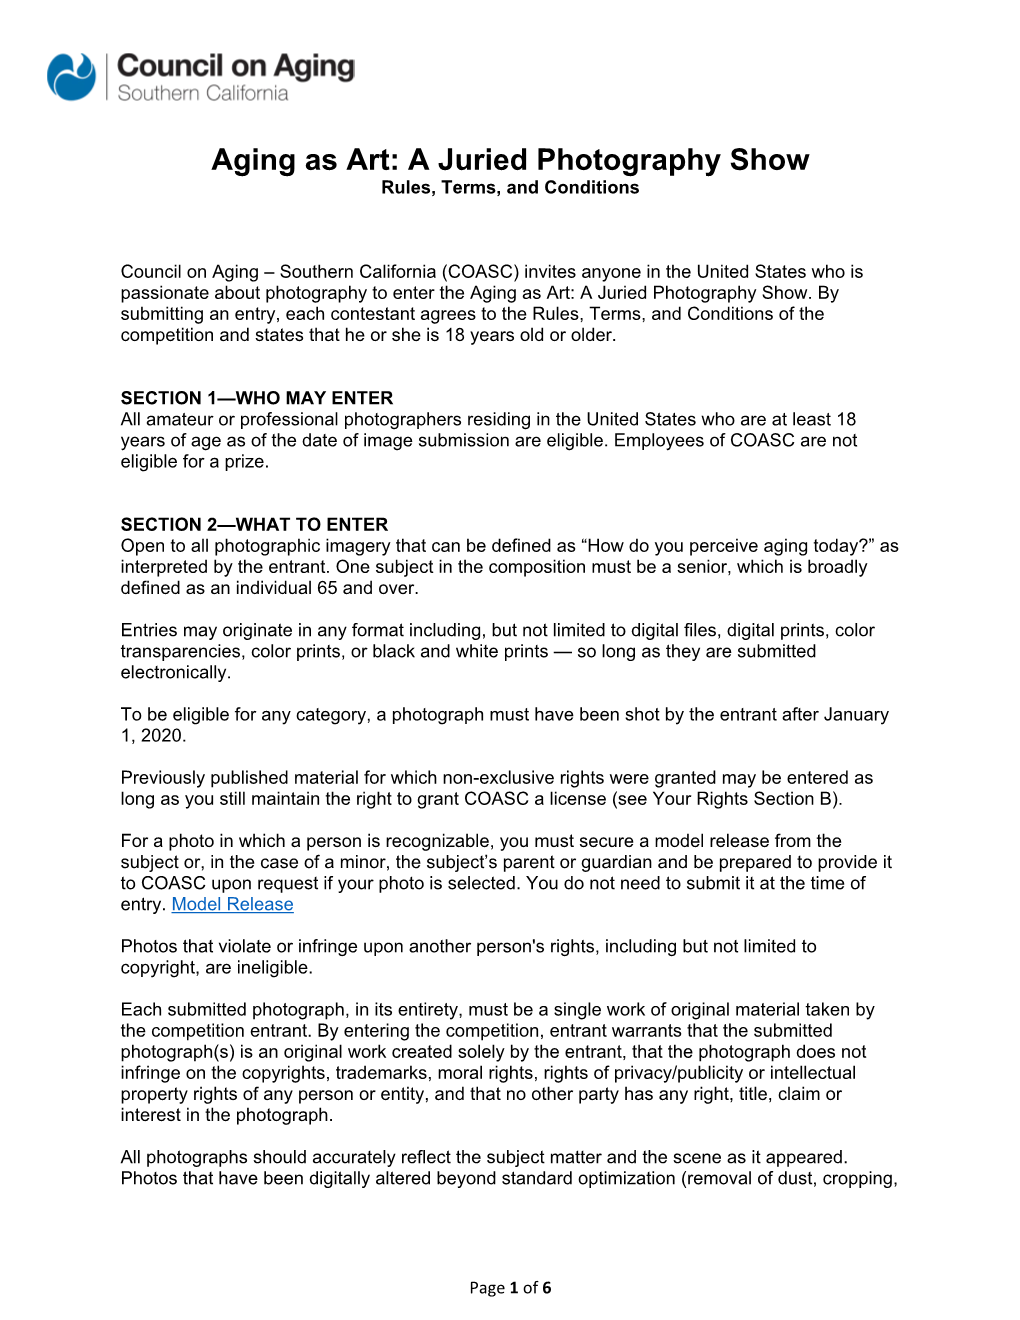 Aging As Art: a Juried Photography Show Rules, Terms, and Conditions